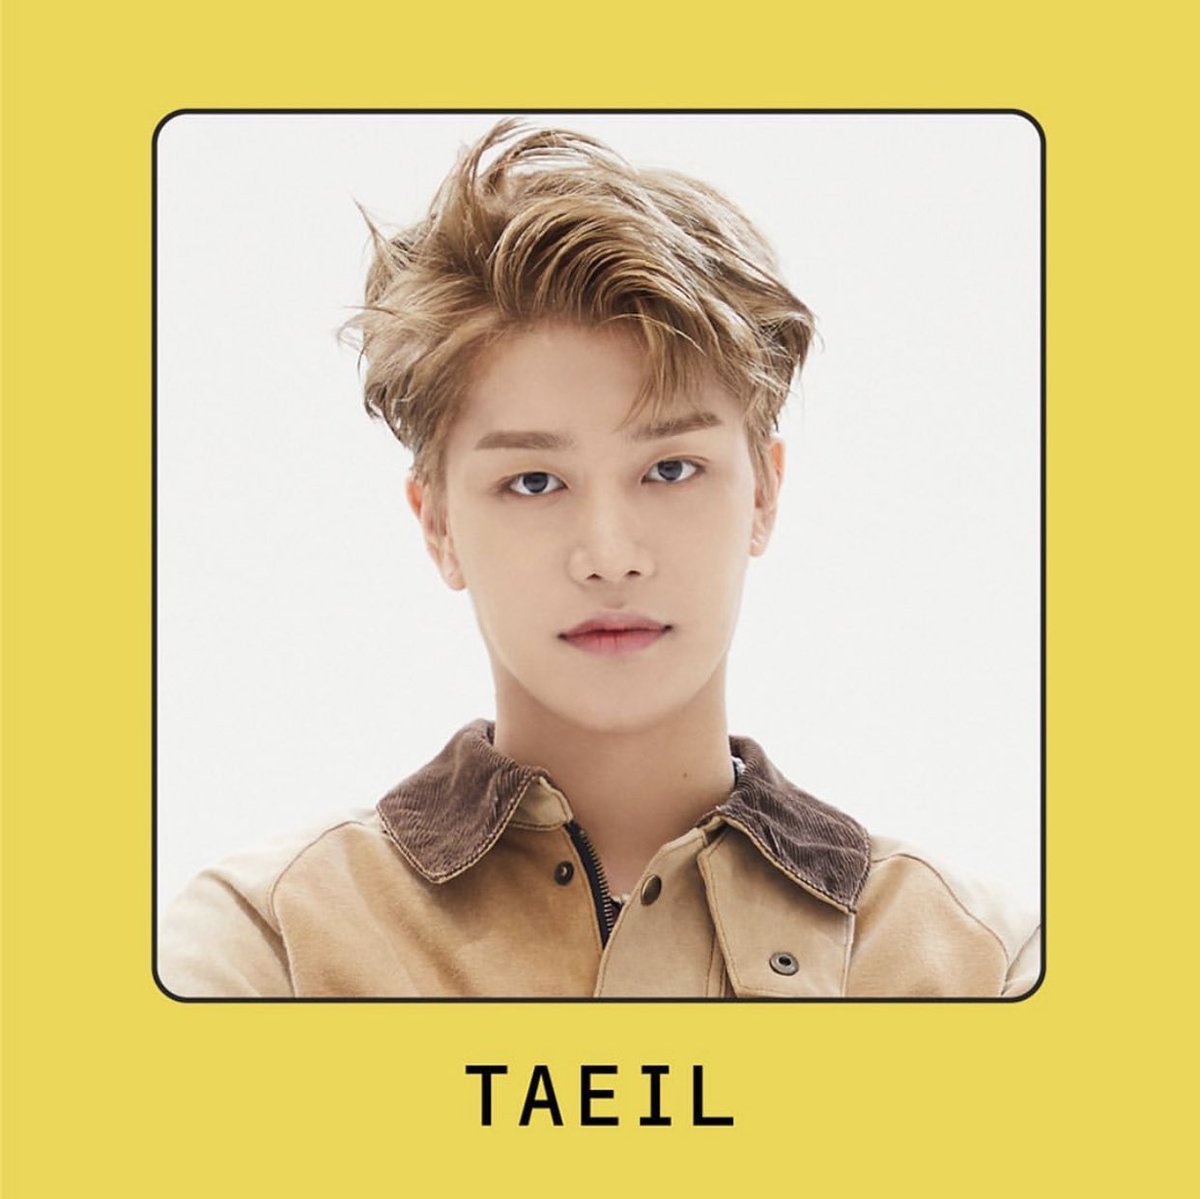 taeil (태일)full name: moon taeil (문태일)birthday: june 14, 1994 (gemini) oldestbirthplace: seoul, south koreaposition: main vocalistheight: 171 cm (5’7”)trainee since: 2013 (3 years)units: nct u, nct 127stans: mooni